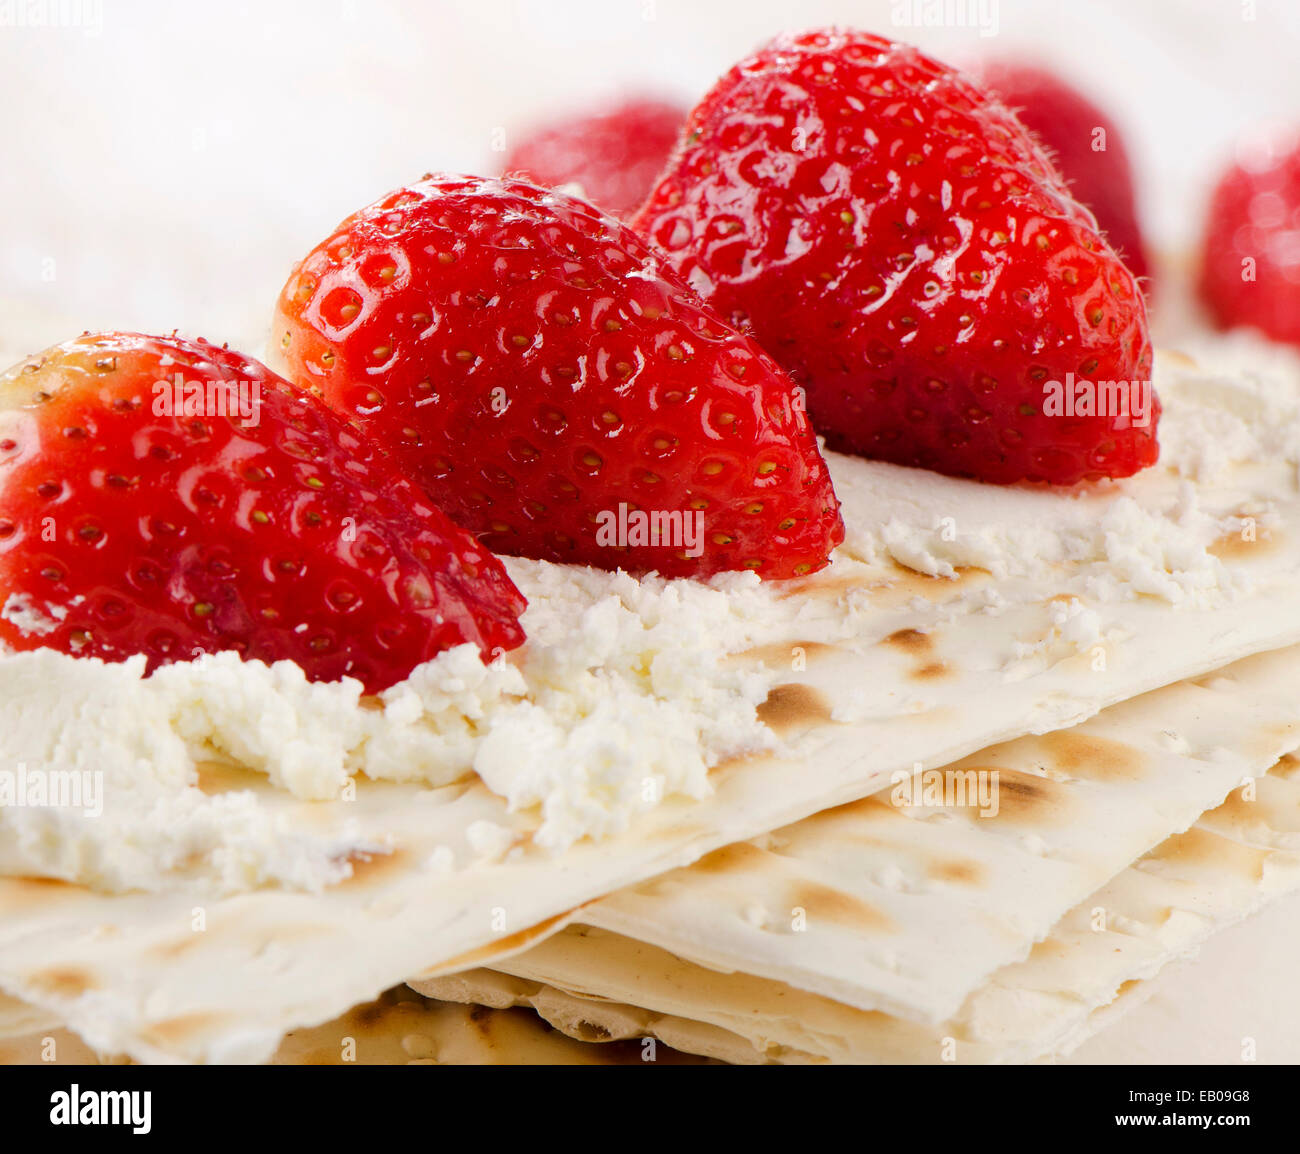 matzoh With cheese and berries  on a wooden table. Selective focus Stock Photo